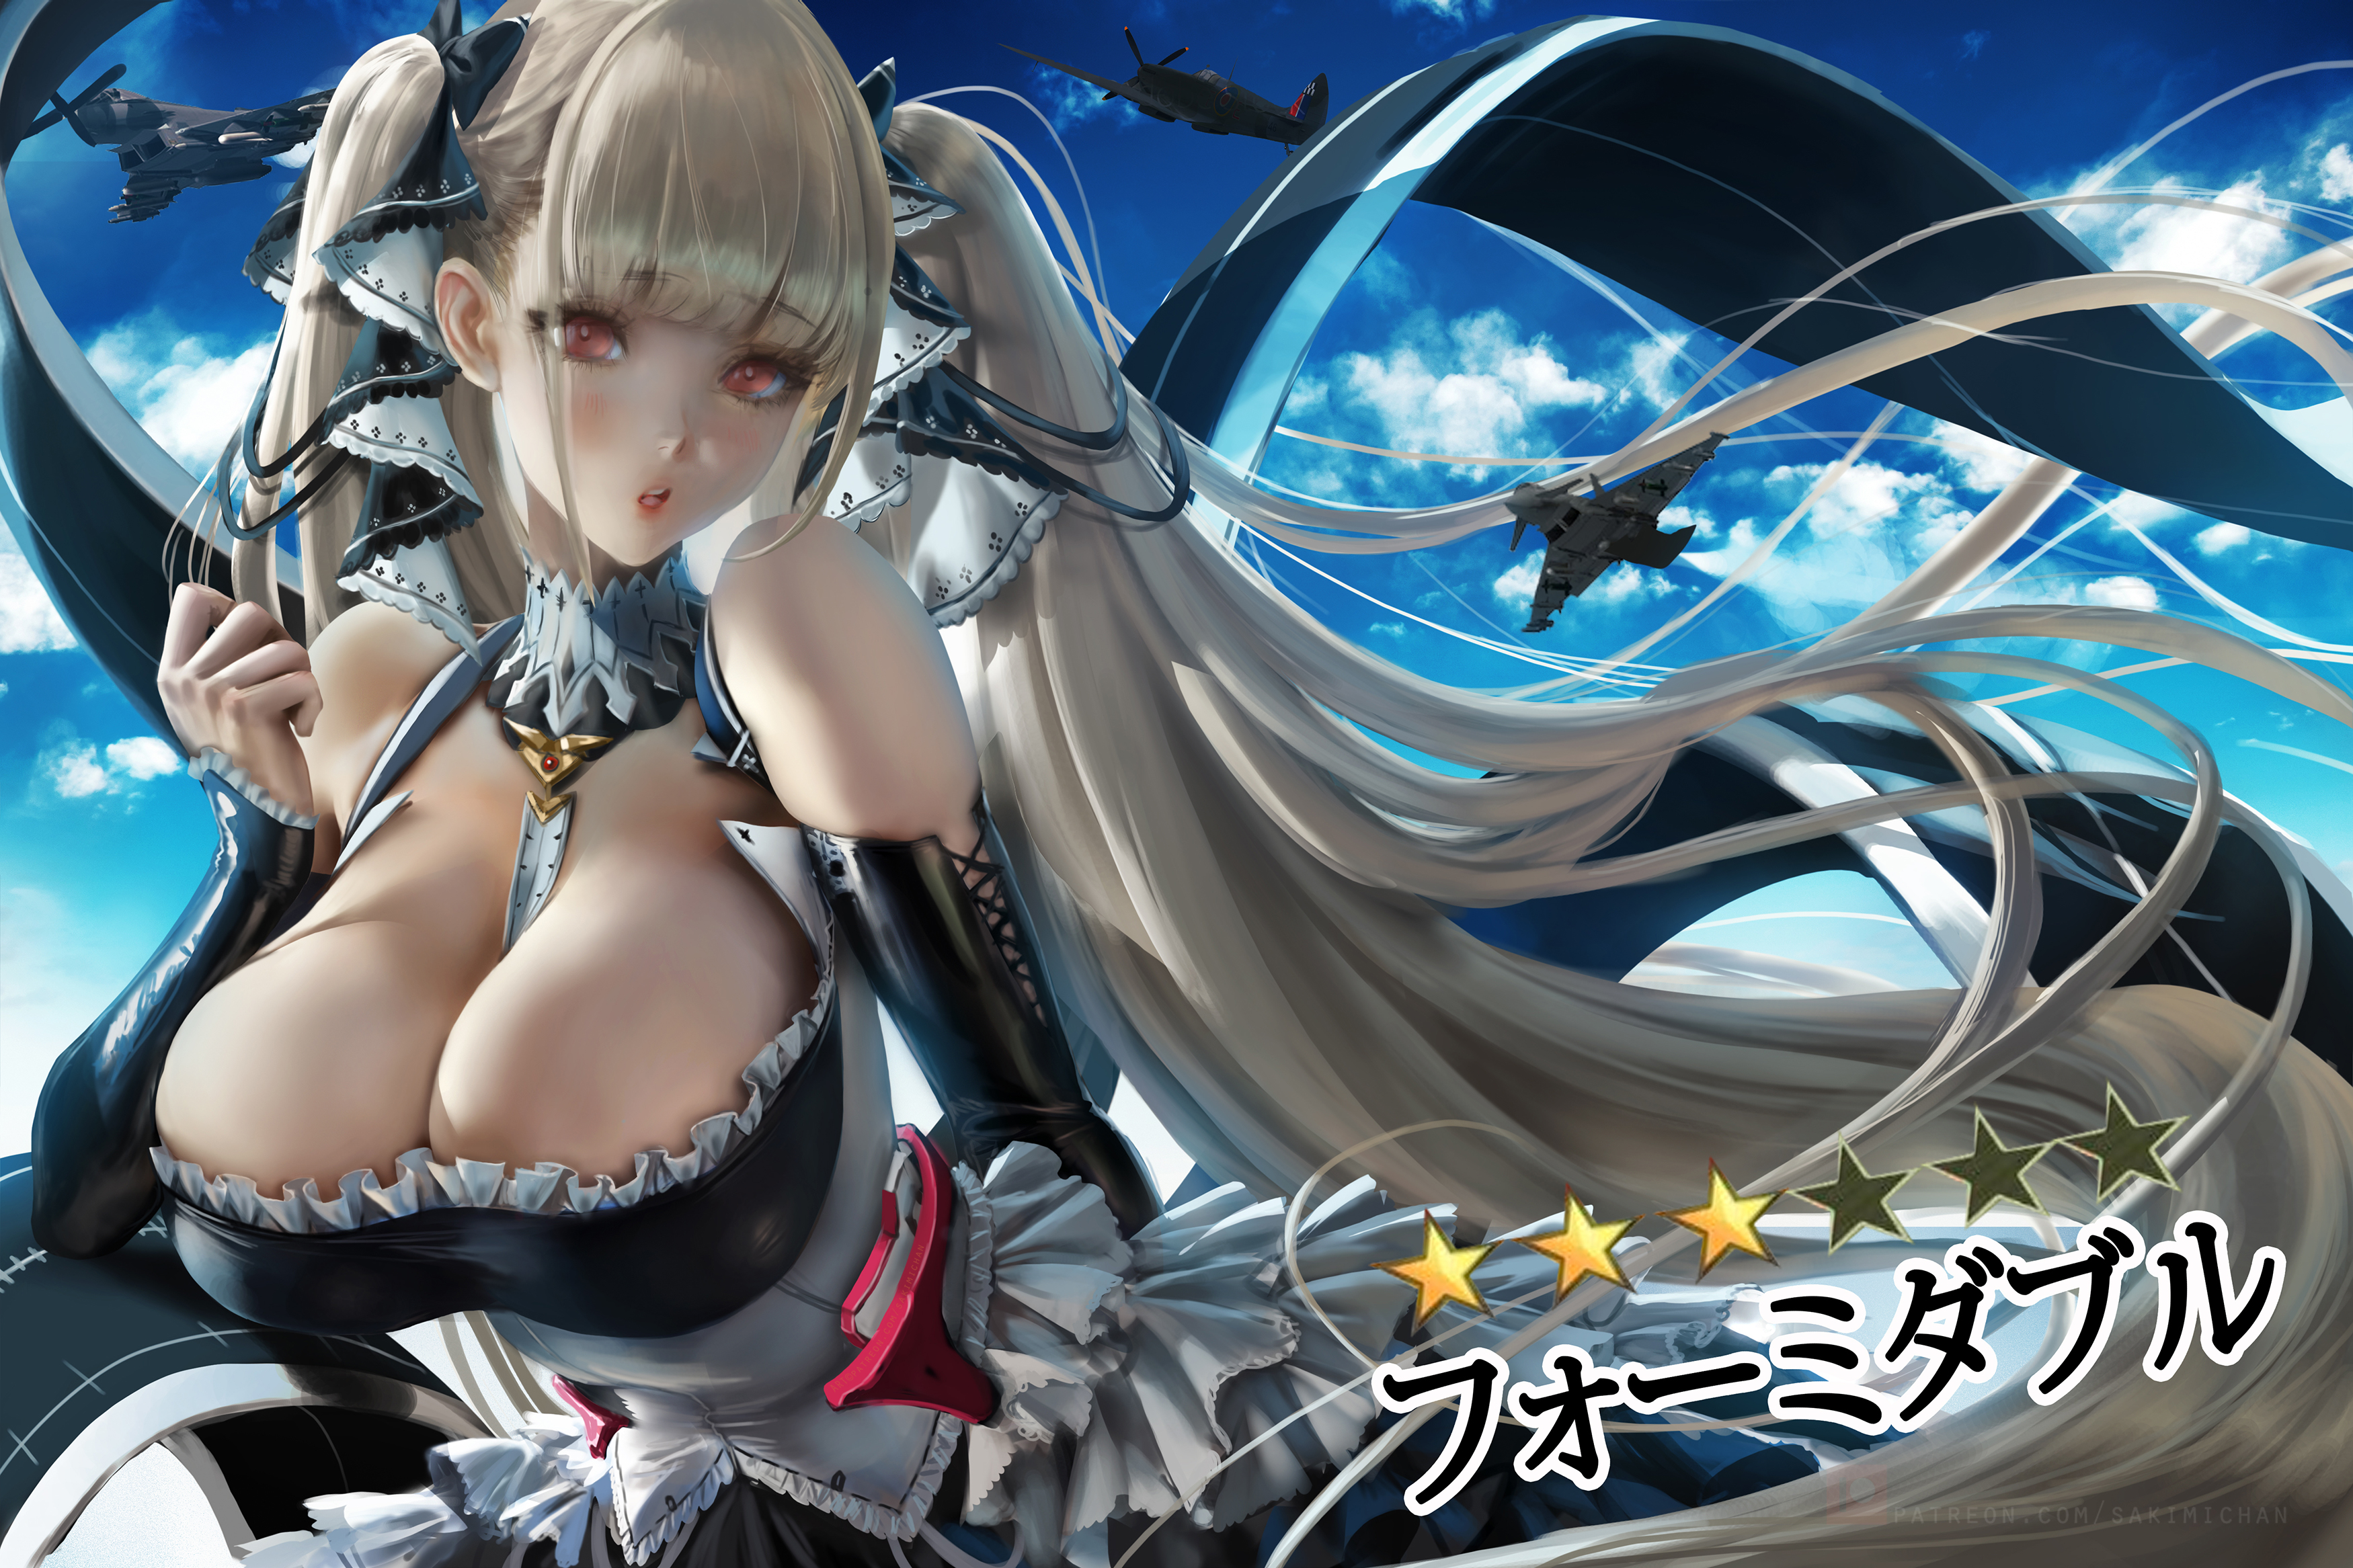 Anime 3500x2333 Formidable (Azur Lane) Azur Lane video games anime anime girls video game characters blonde twintails long hair bangs bare shoulders cleavage big boobs dress blushing looking at viewer open mouth sky clouds aircraft fantasy girl artwork drawing digital art illustration fan art Sakimichan curvy